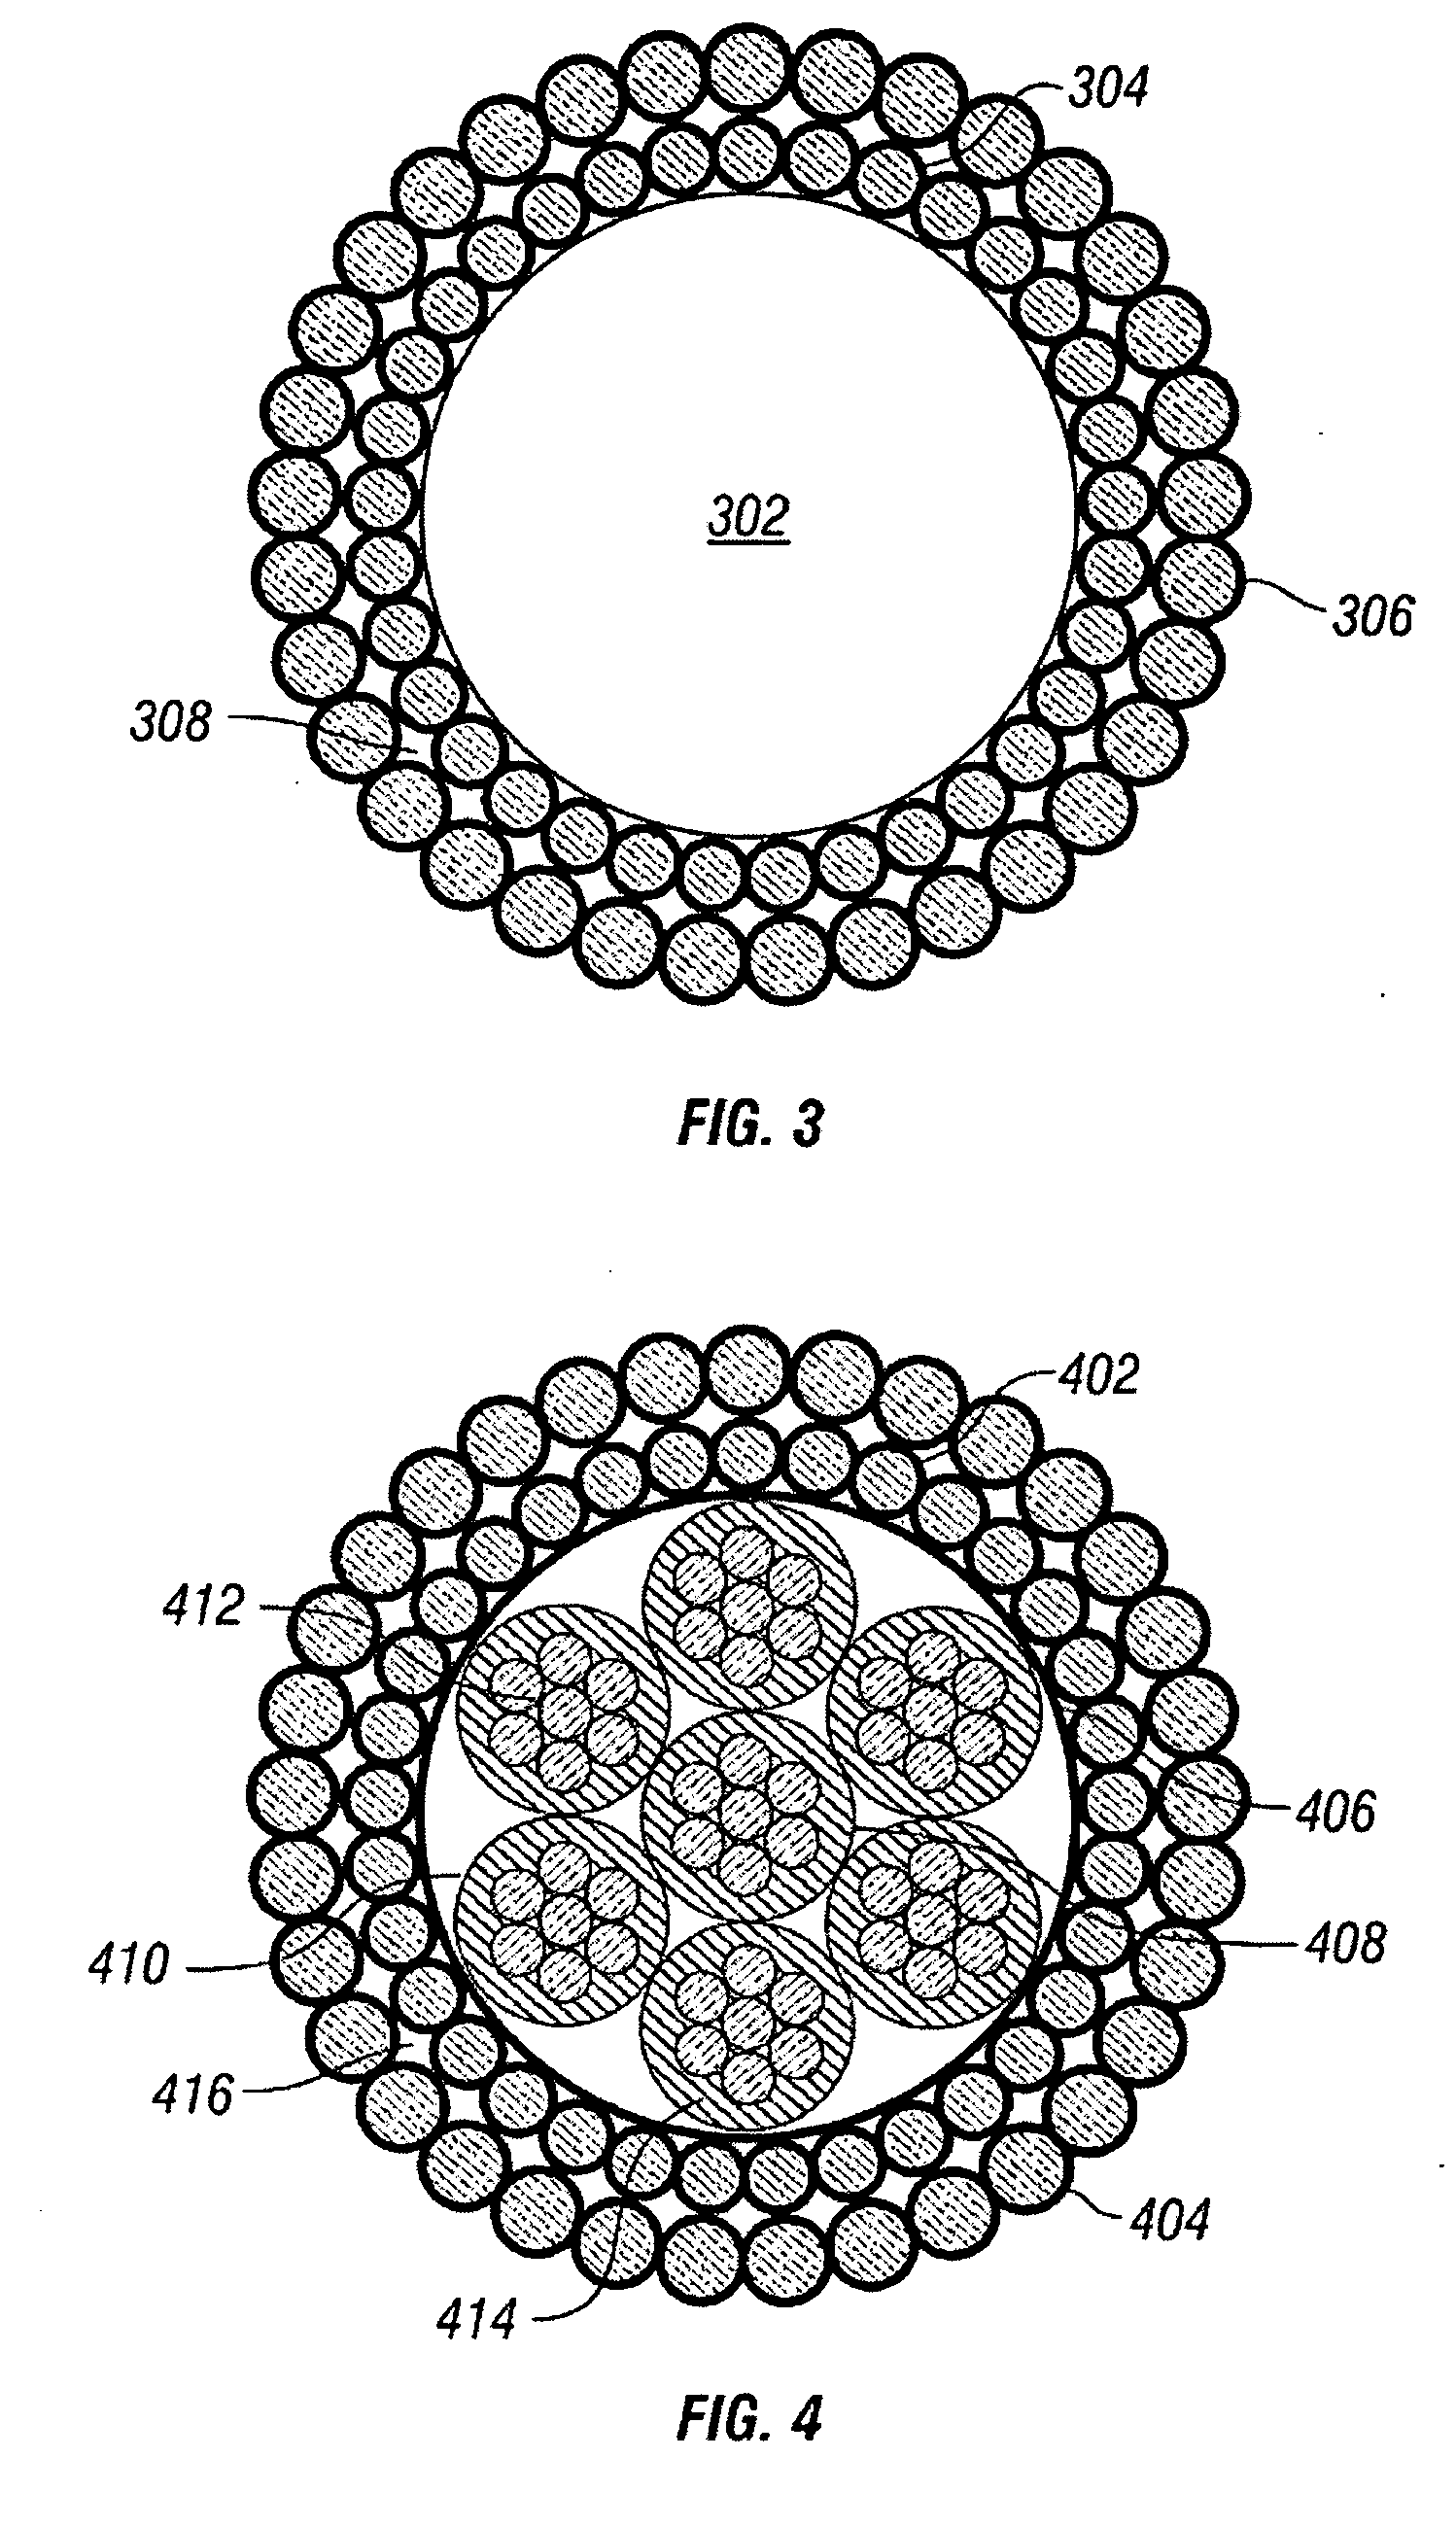 Lightweight armor wires for electrical cables